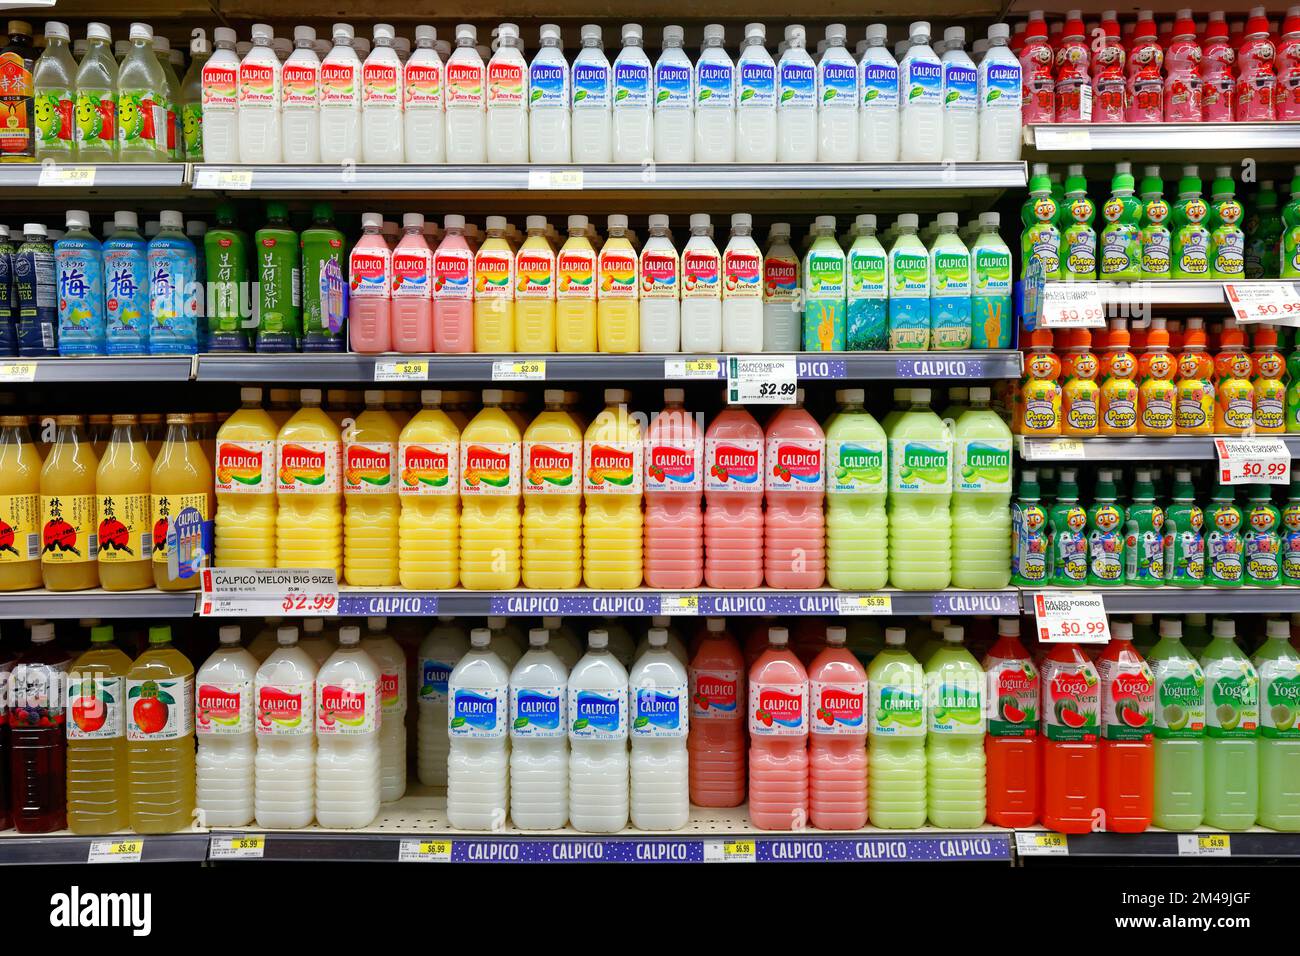 Bottles of Calpico milk-based soft drink on a supermarket shelf in an Asian grocery store. Stock Photo